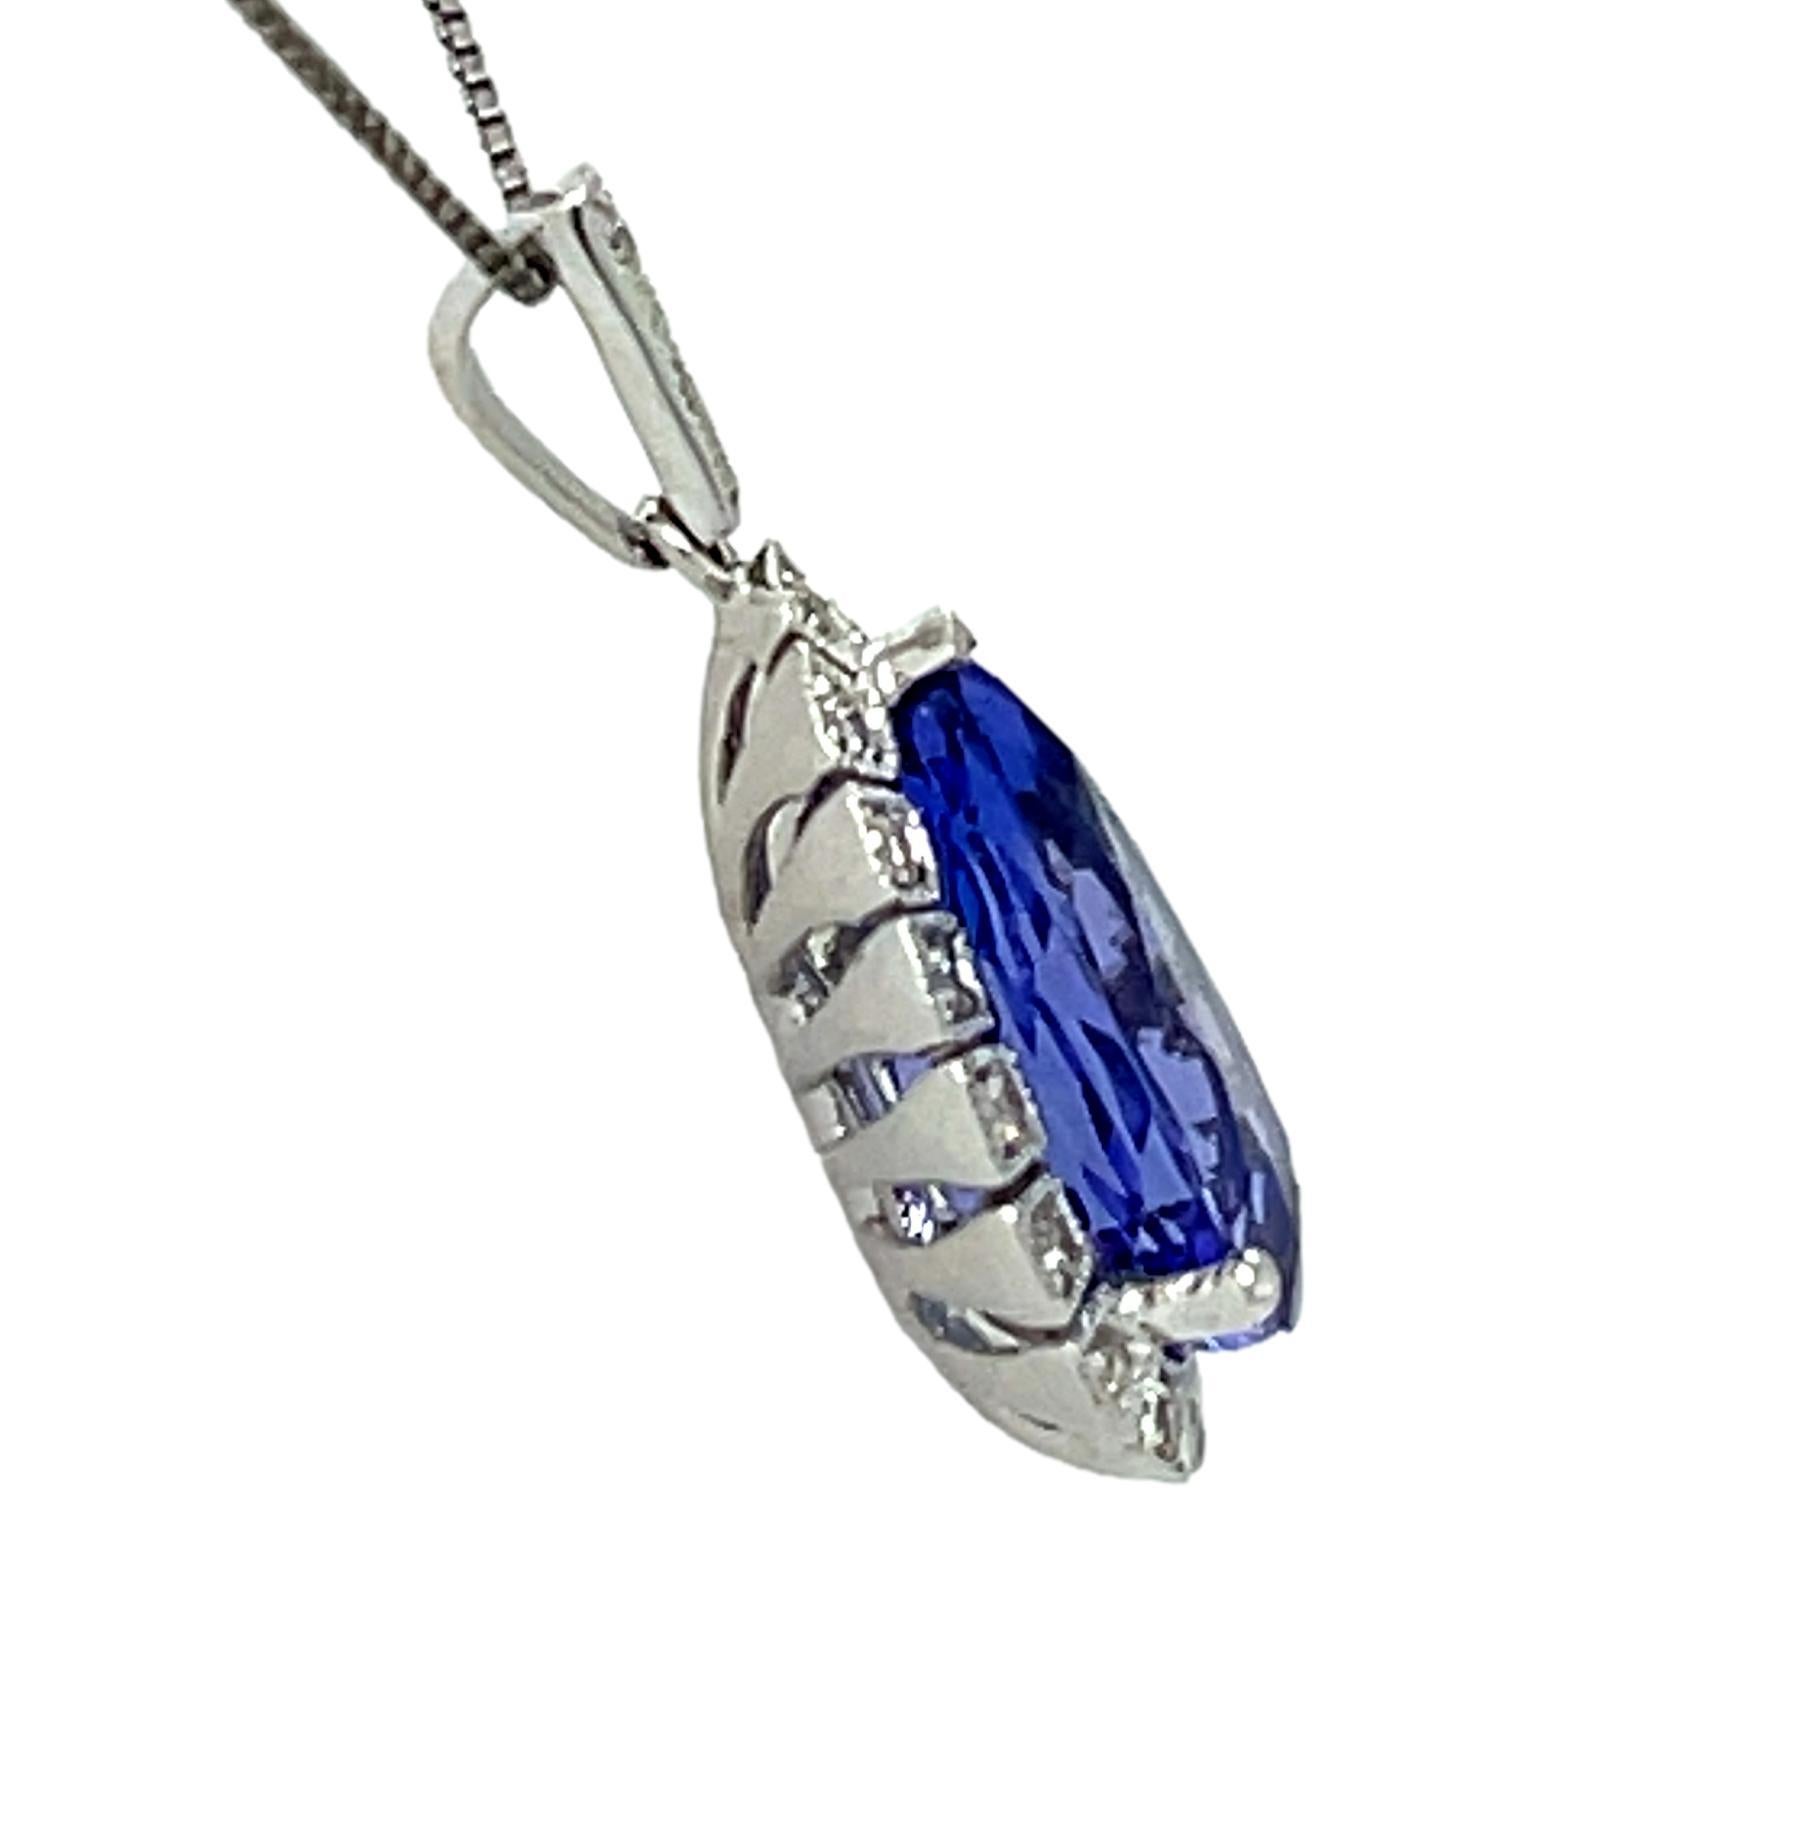 This stunning solitaire tear drop AAA quality Tanzanite pendant is surrounded by top quality shimmering brilliant cut diamonds. It comes in a beautiful box ready for the perfect gift! Gold chain included. 

18KW:          2.10 gms
Tanz wt:      3.81